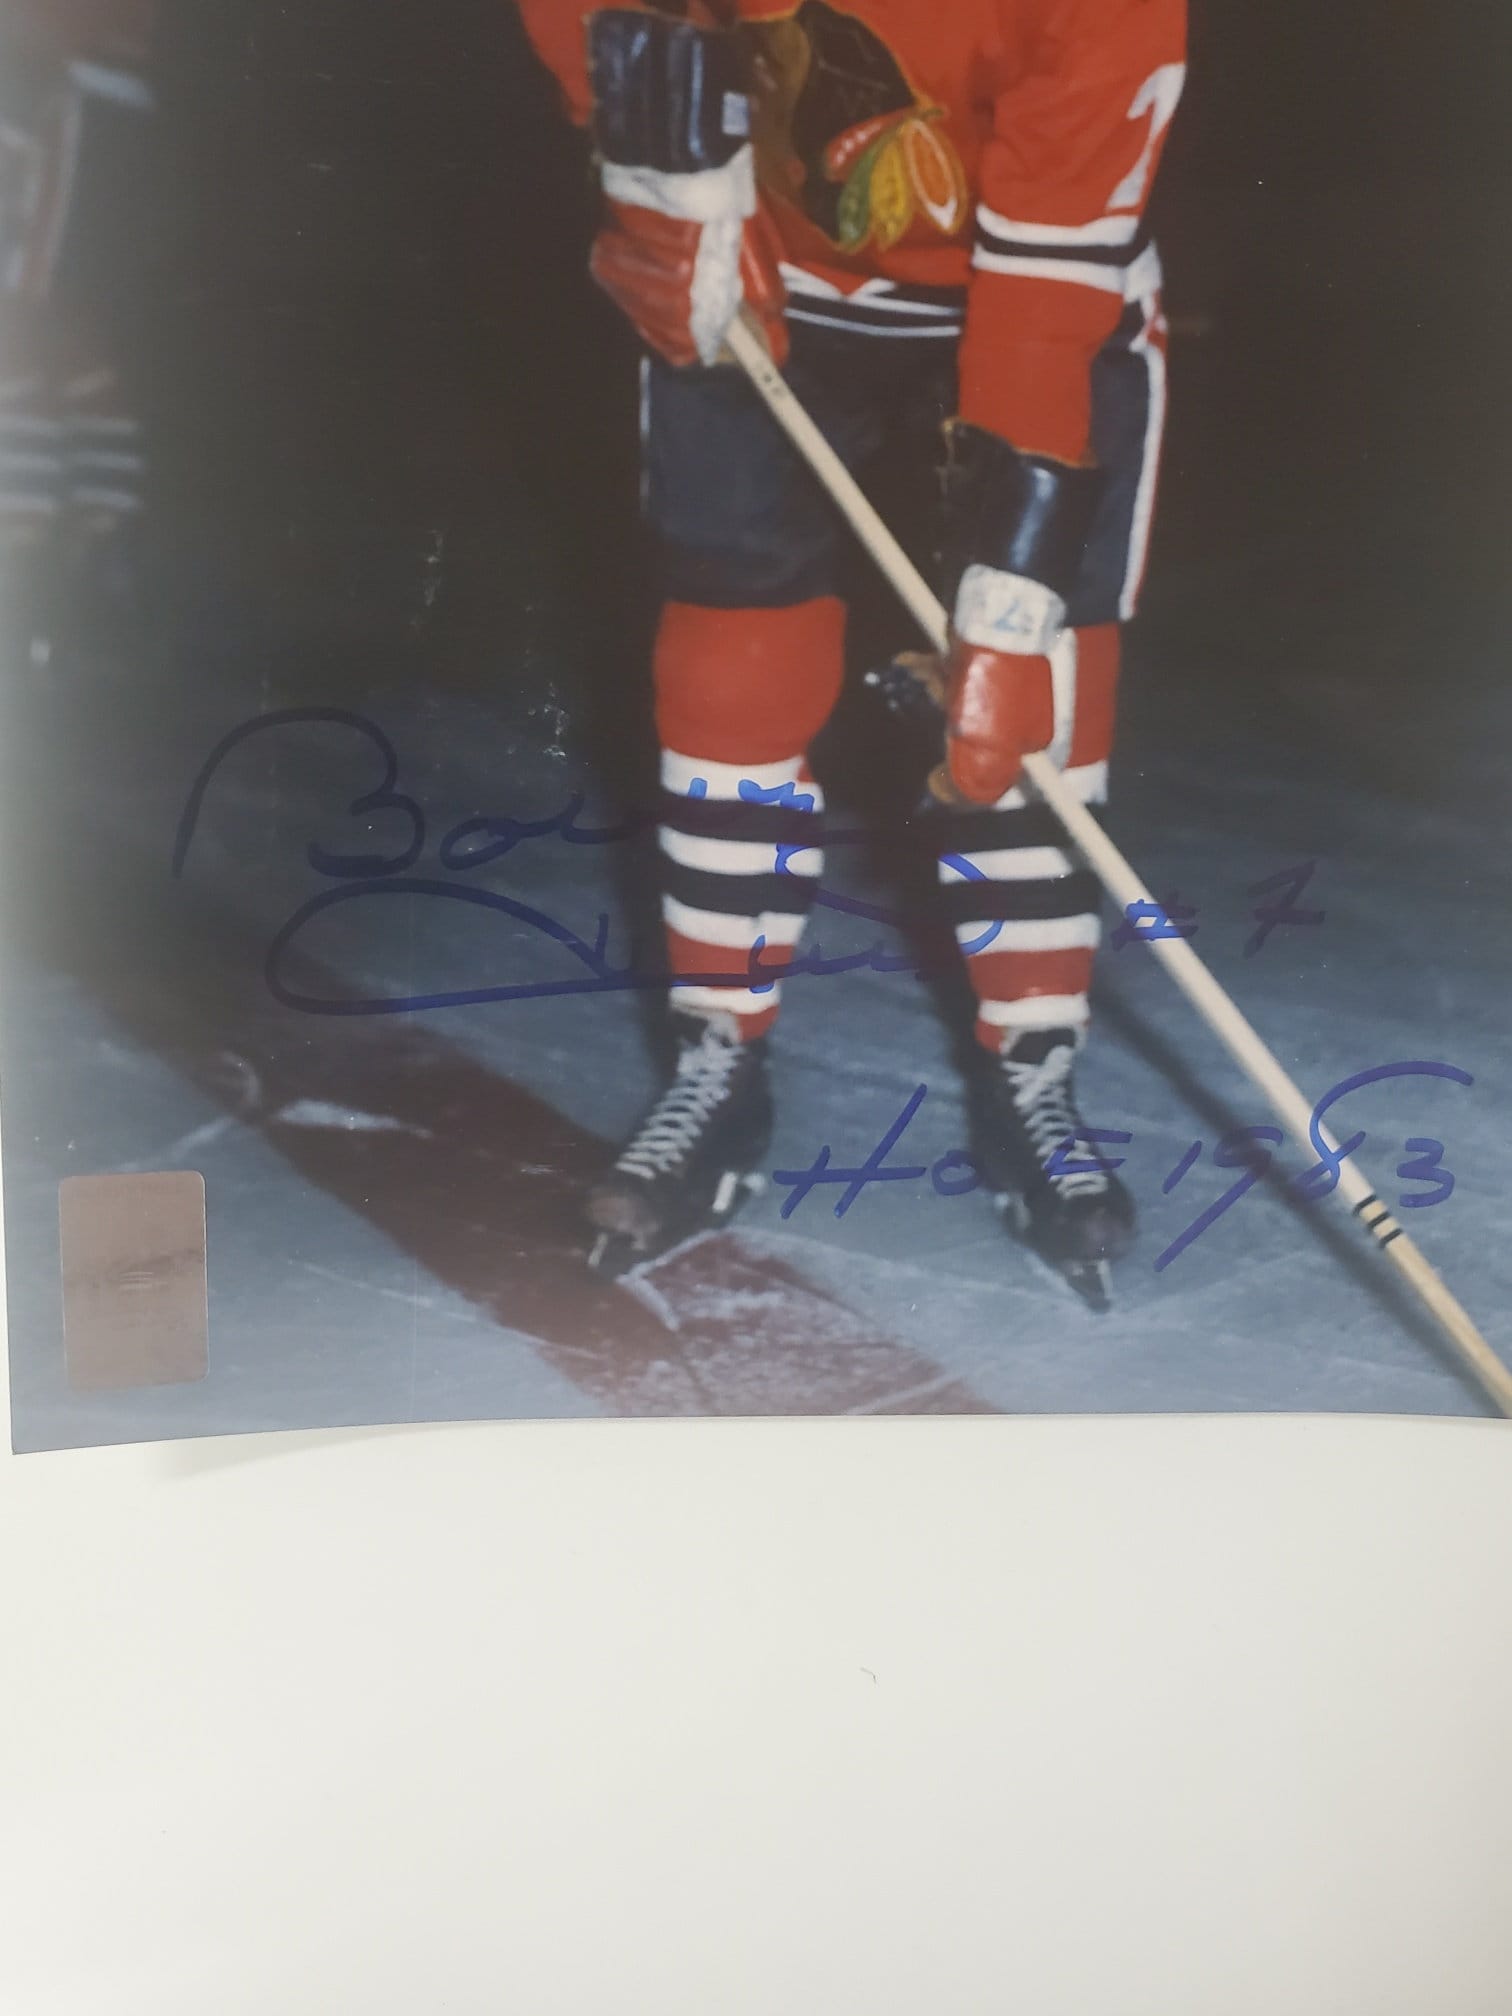 Bobby Hull Autographed Signed Inscribed Chicago Blackhawks 8X10